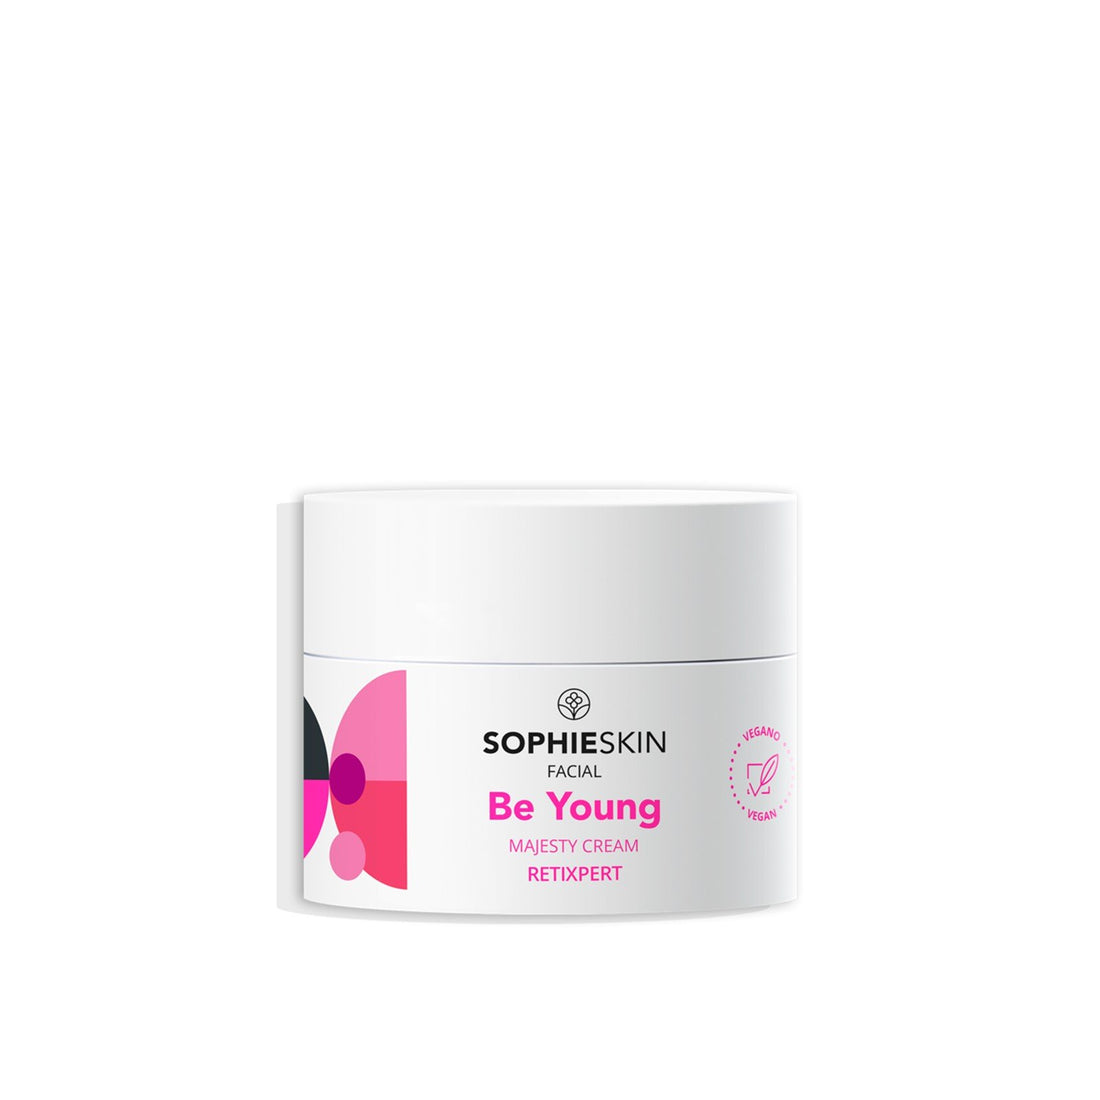 Sophieskin Be Young Majesty Creme 50ml